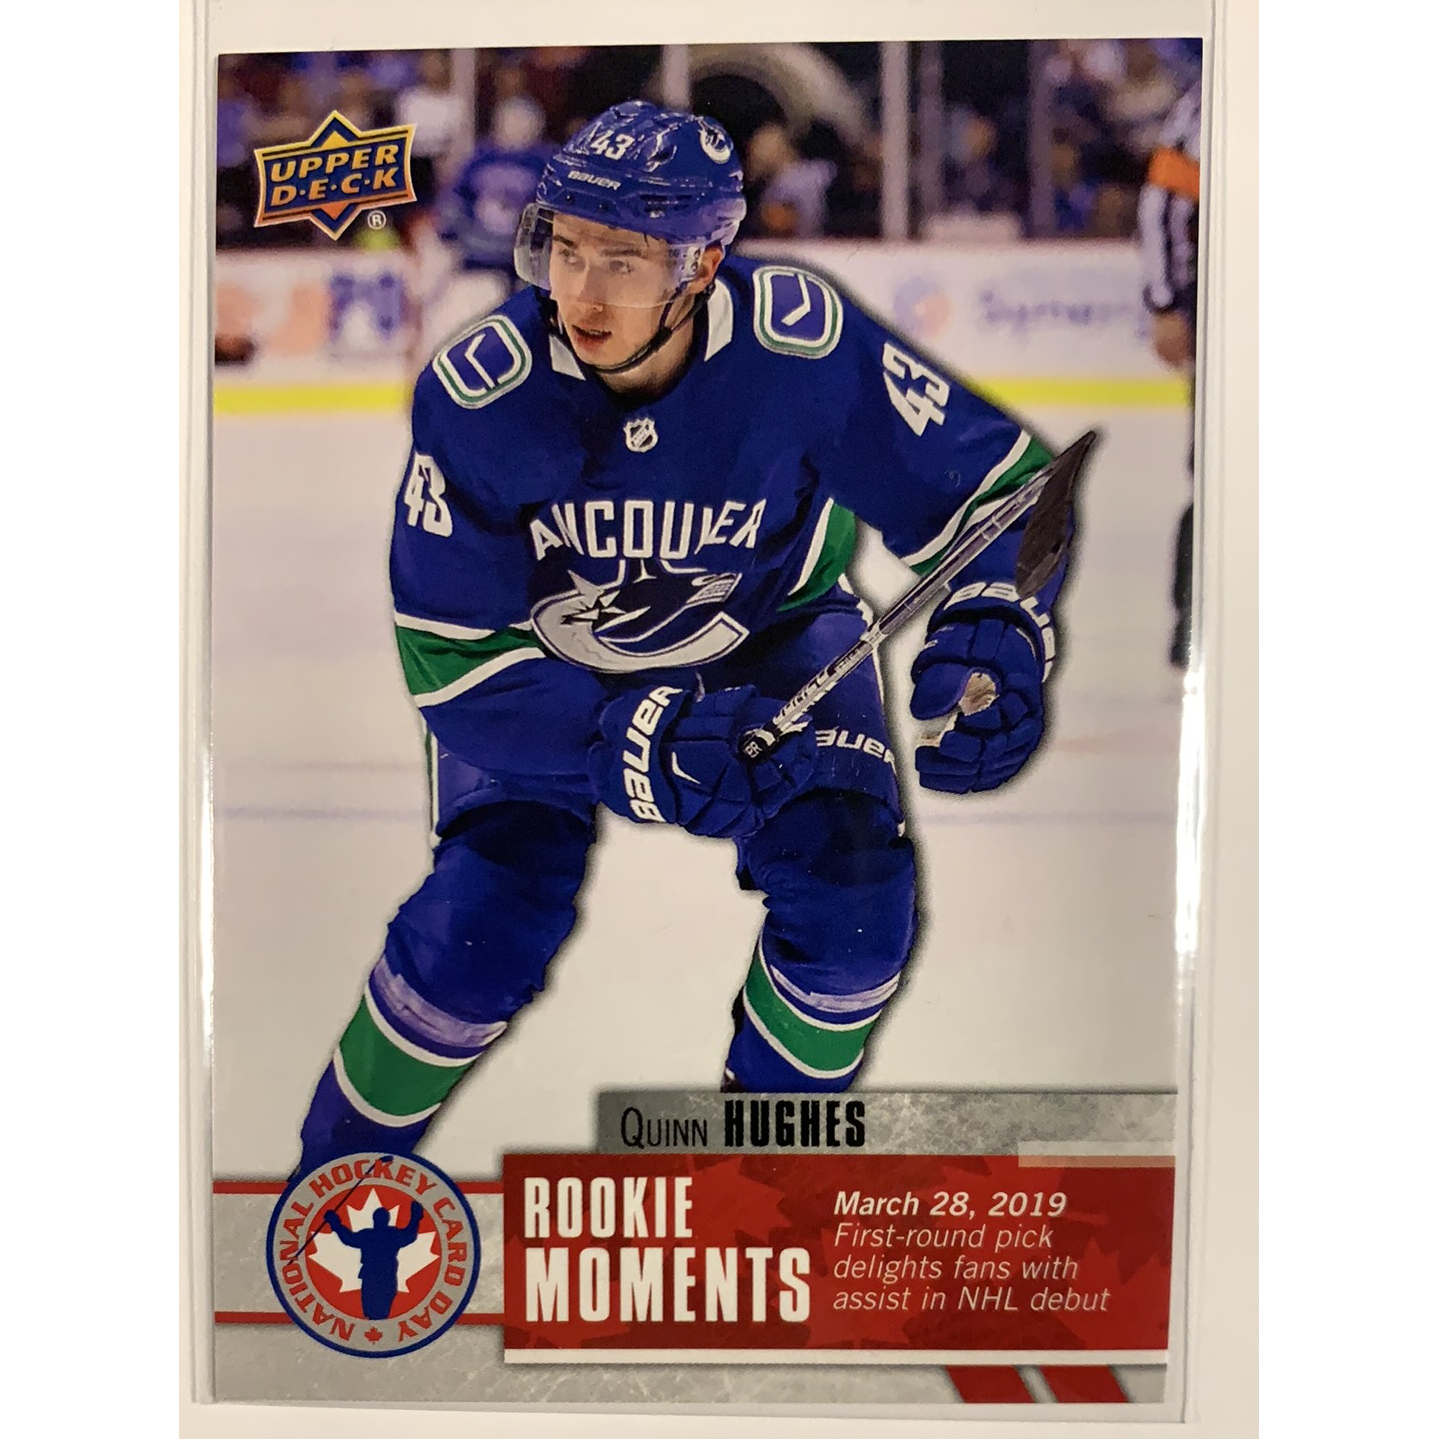  2019-20 Upper Deck Day In Canada Quinn Hughes Rookie Moments  Local Legends Cards & Collectibles